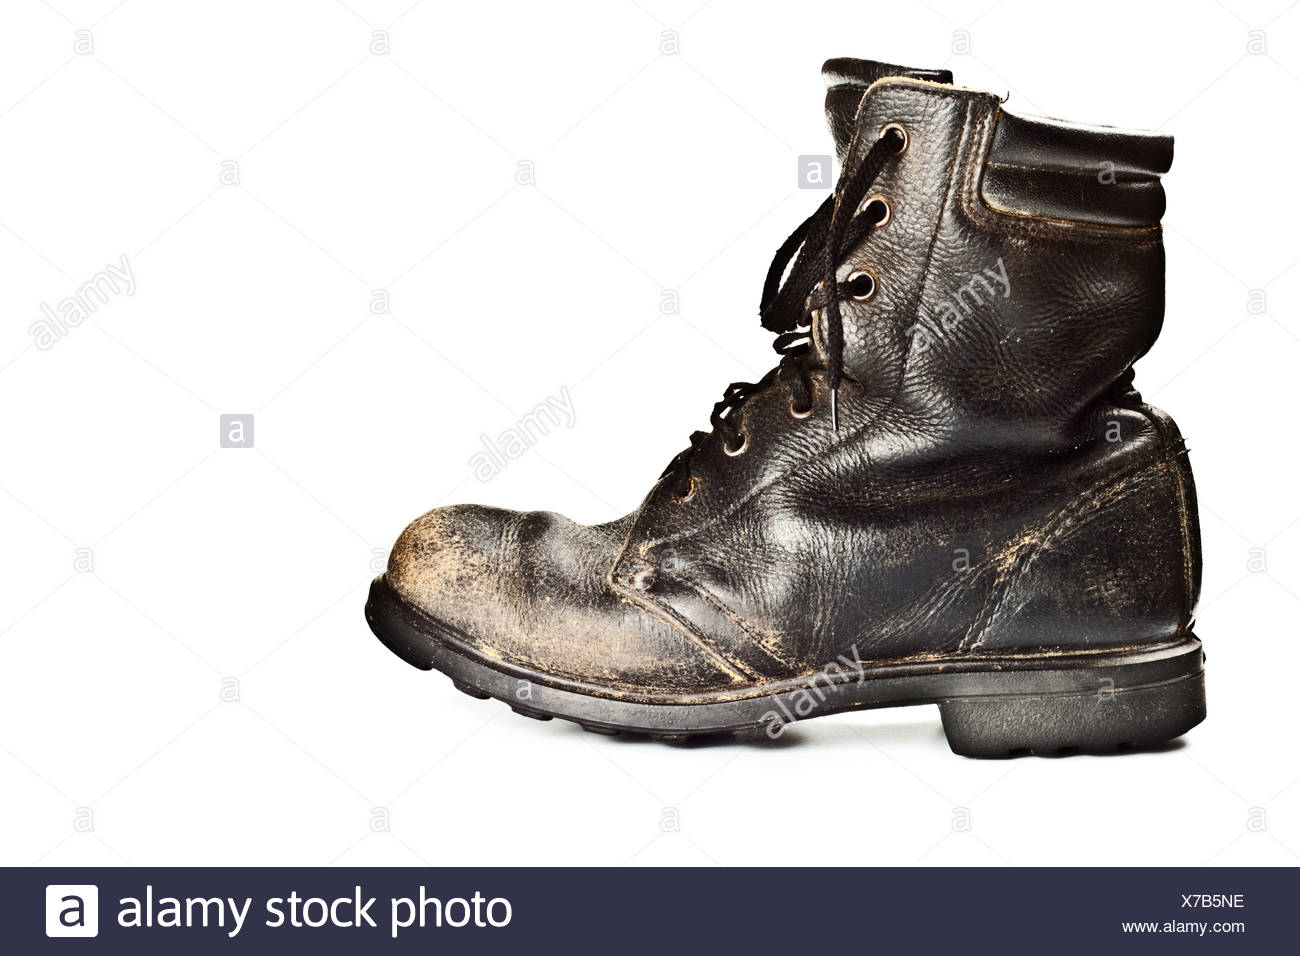 old style boots